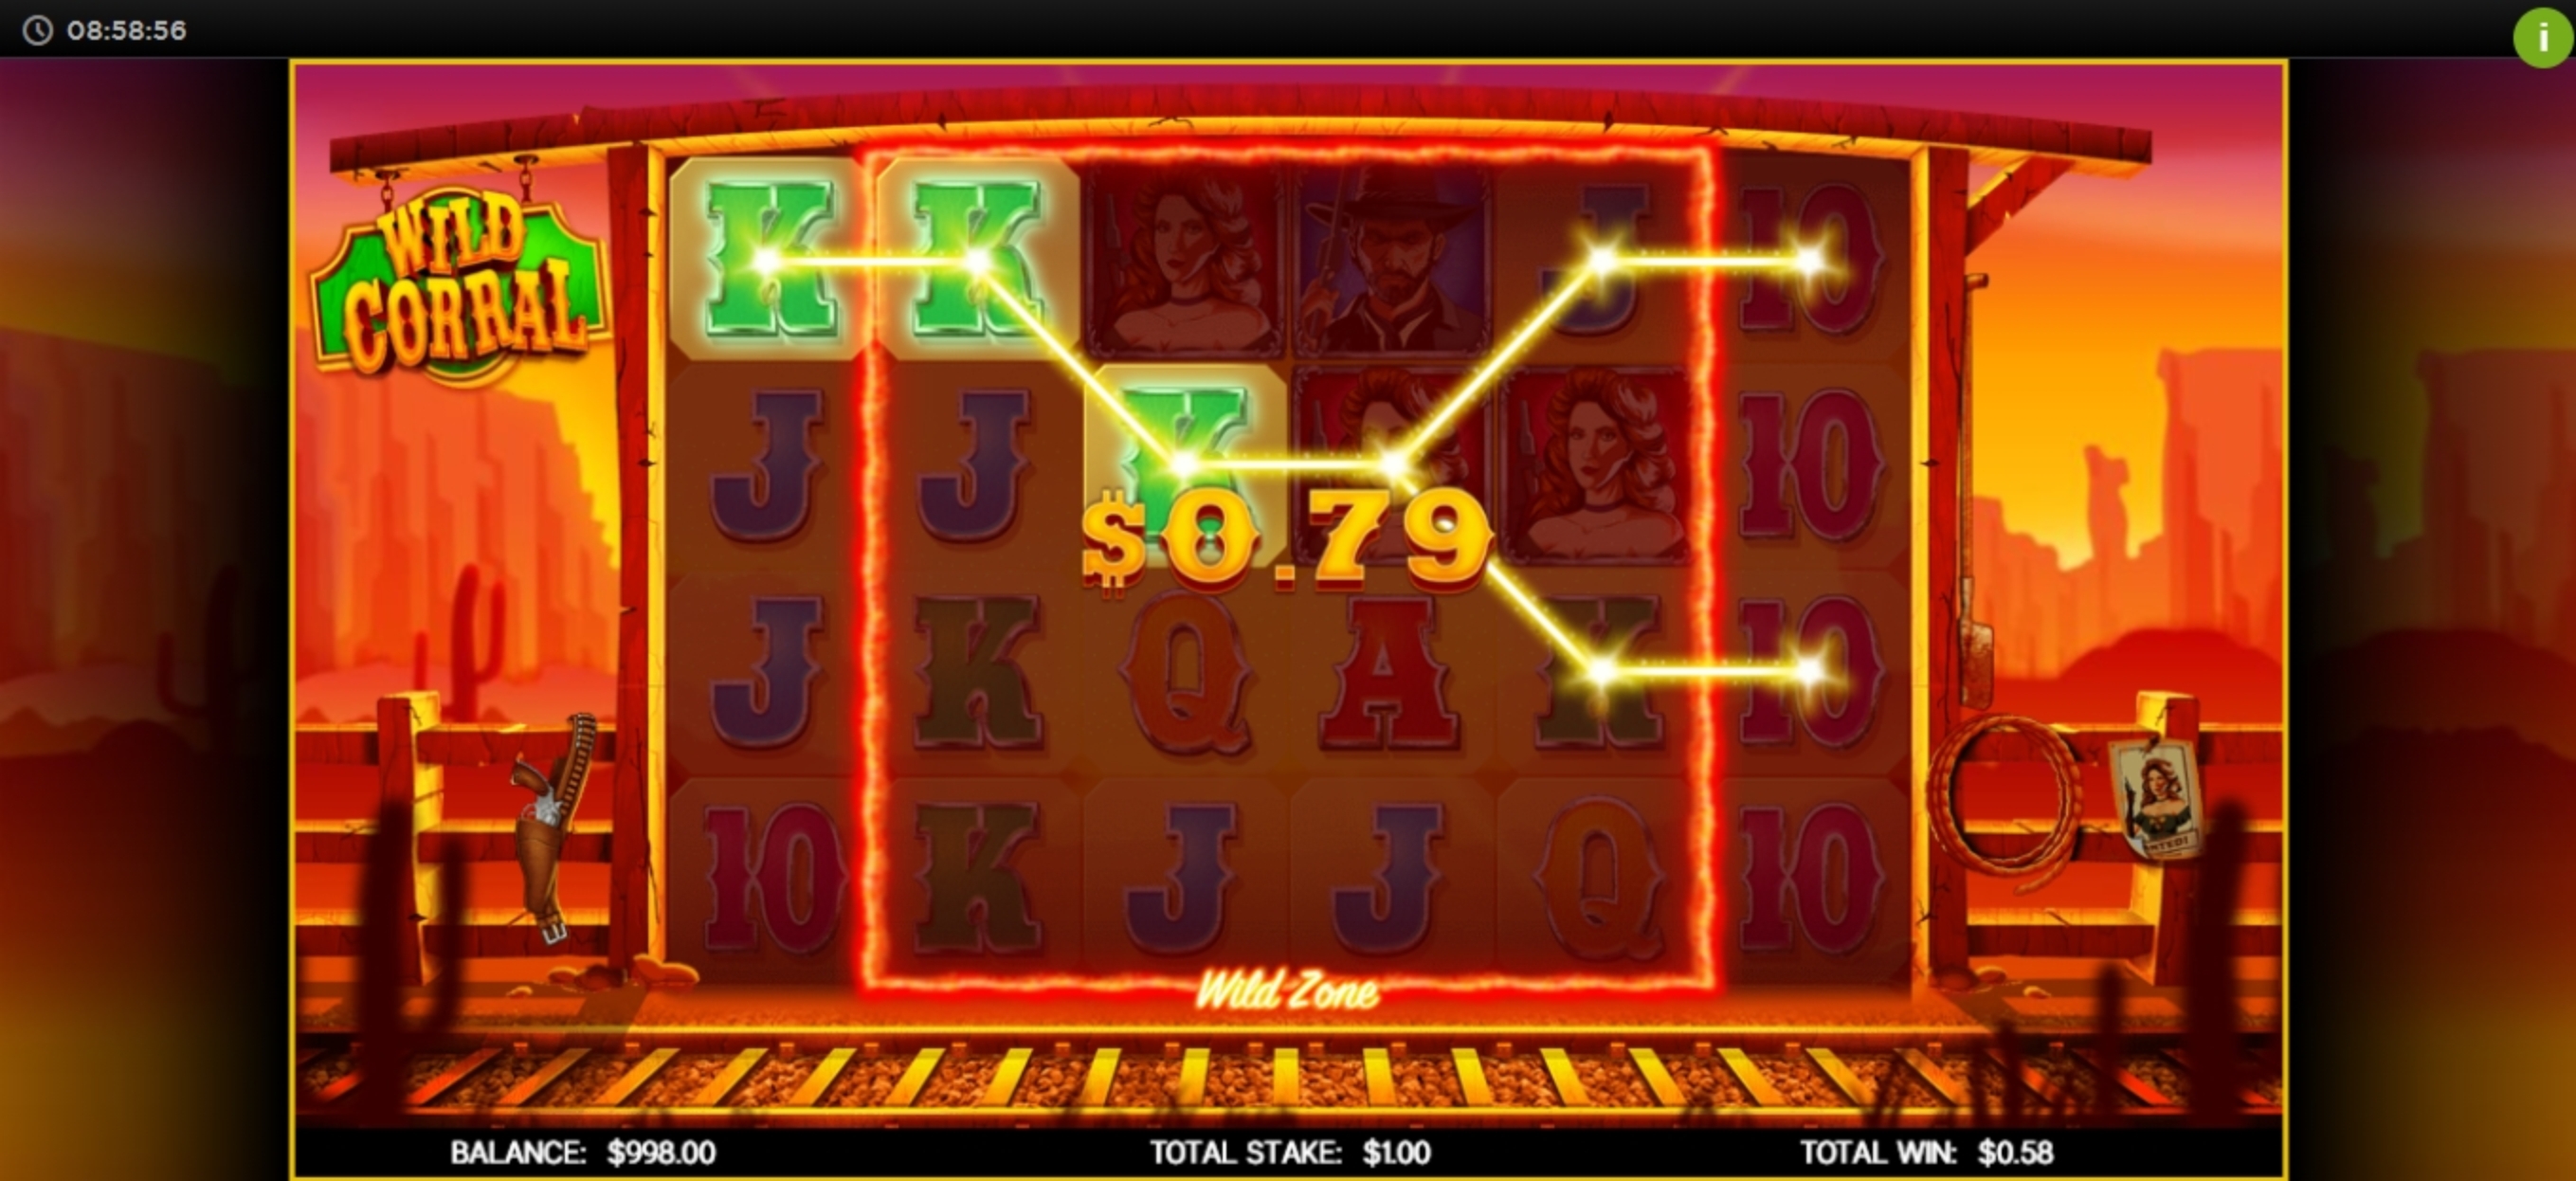 Win Money in Wild Corral Free Slot Game by CORE Gaming